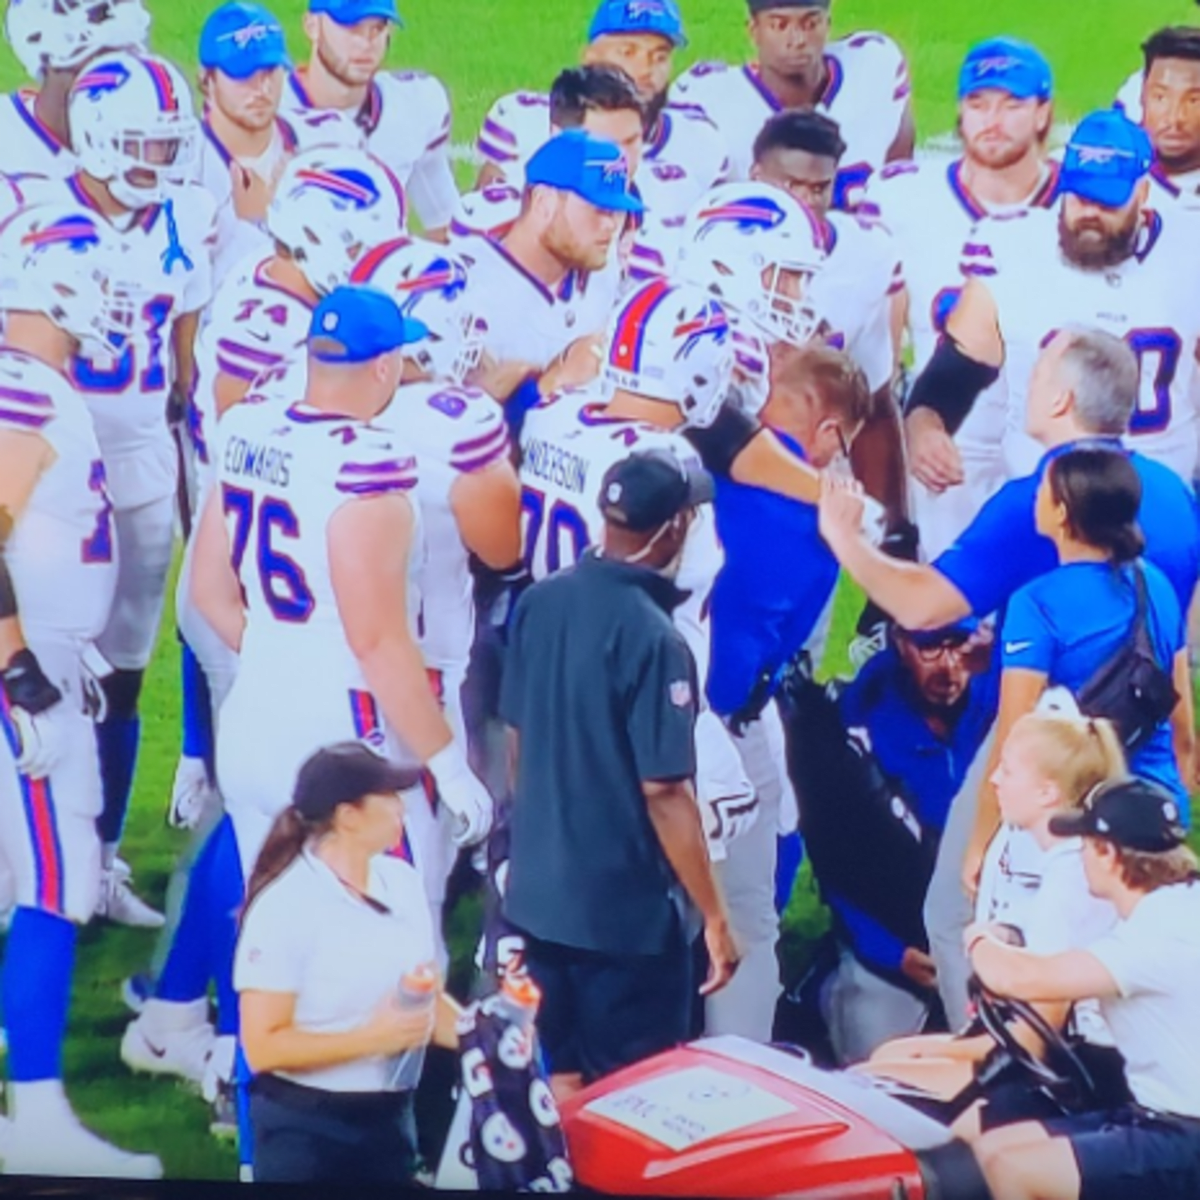 Bills get major scare as rising star is carted off the field - A